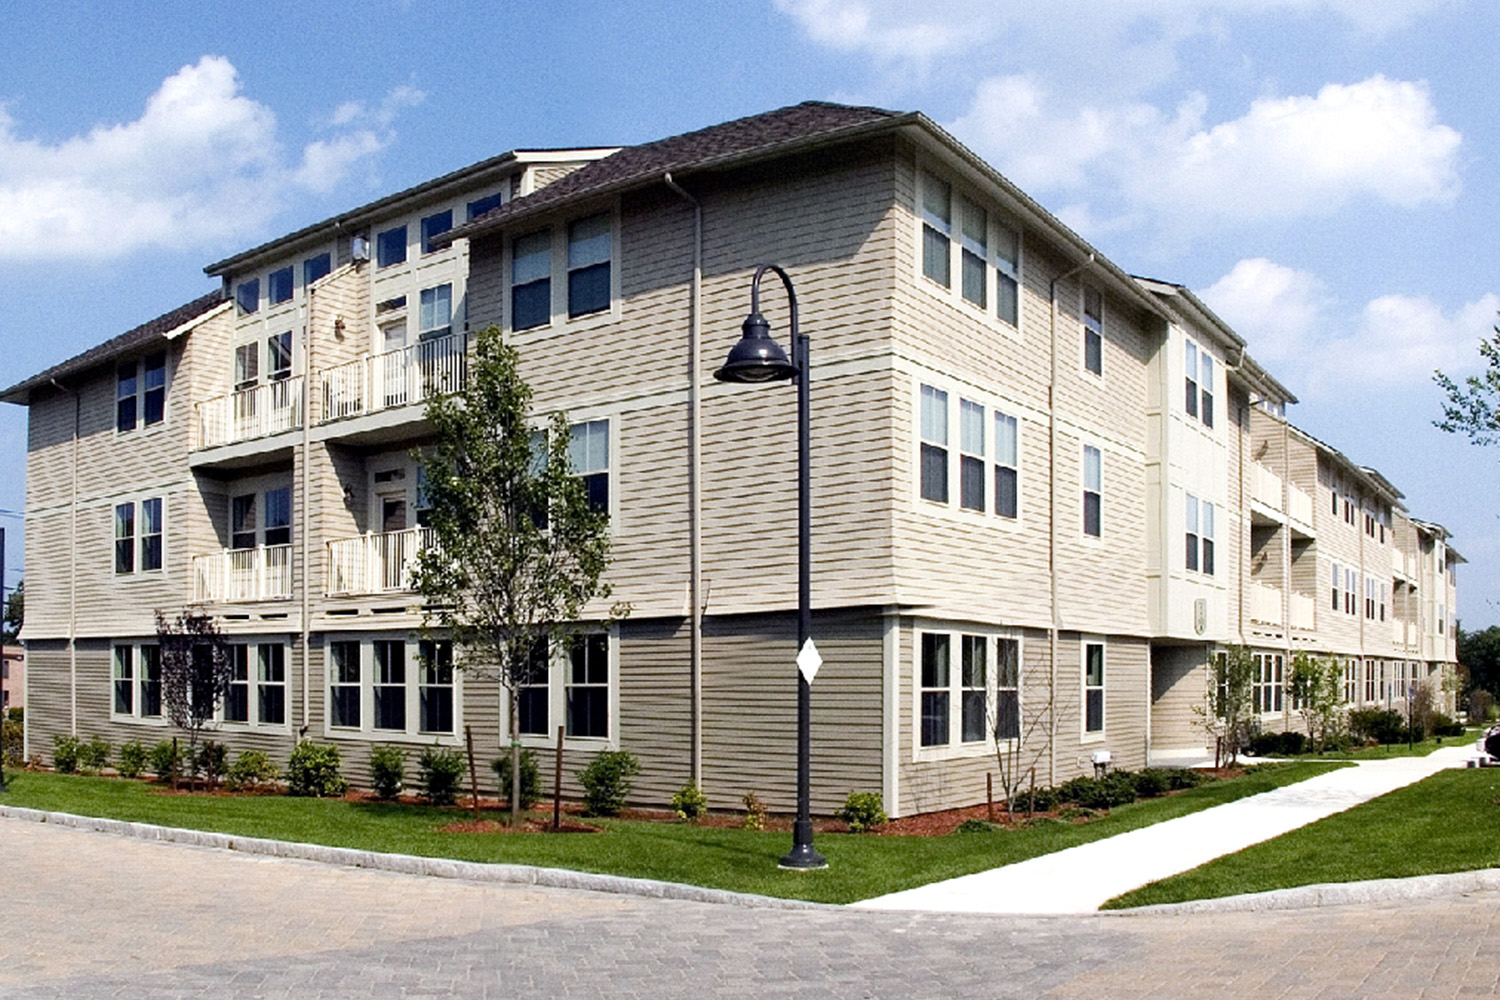 Exterior of Oakridge Village complex seen from an angled distance 